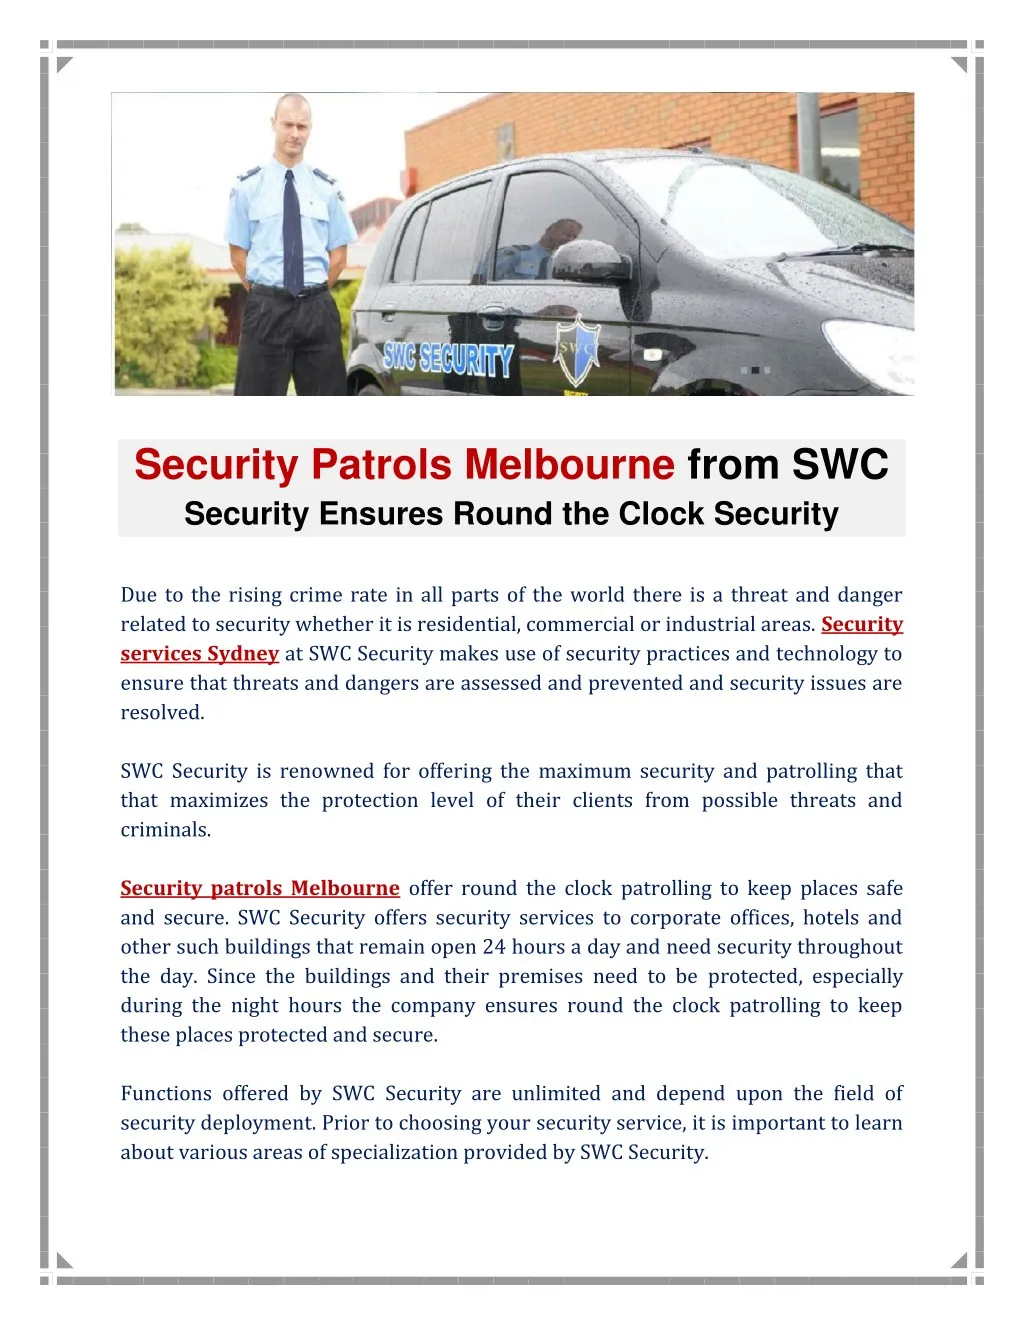 security patrols melbourne from swc security